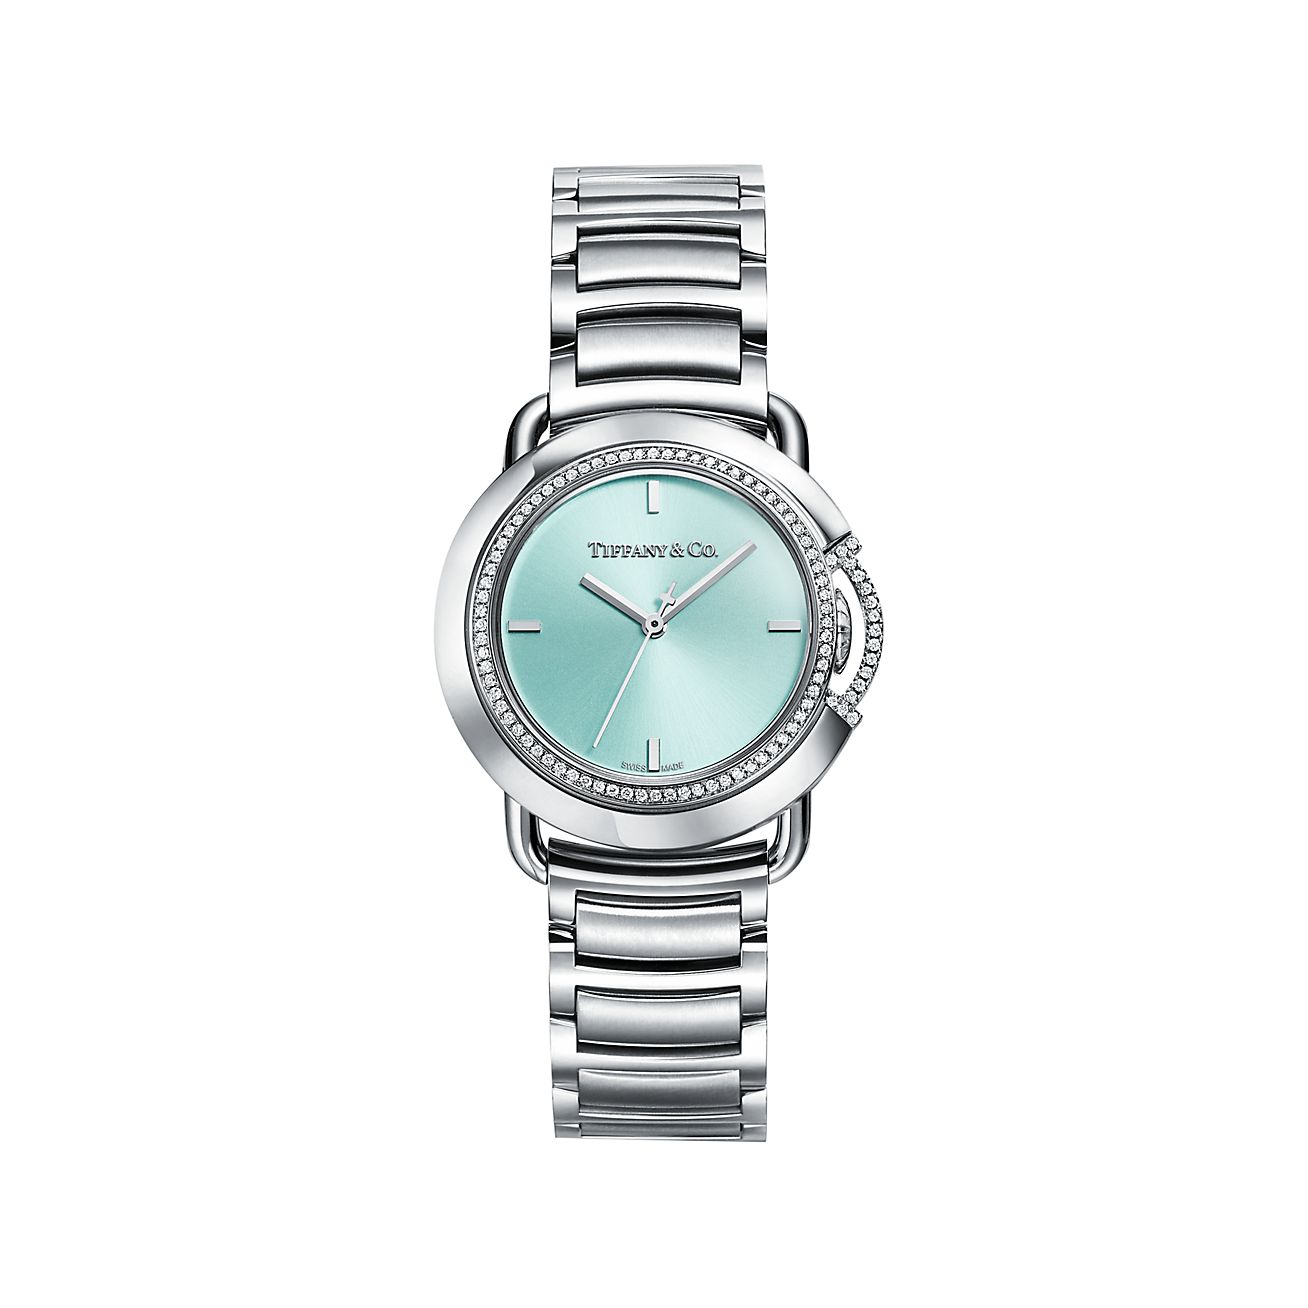 Tiffany T limited edition 32 mm round watch in stainless steel with  diamonds. | Tiffany & Co.